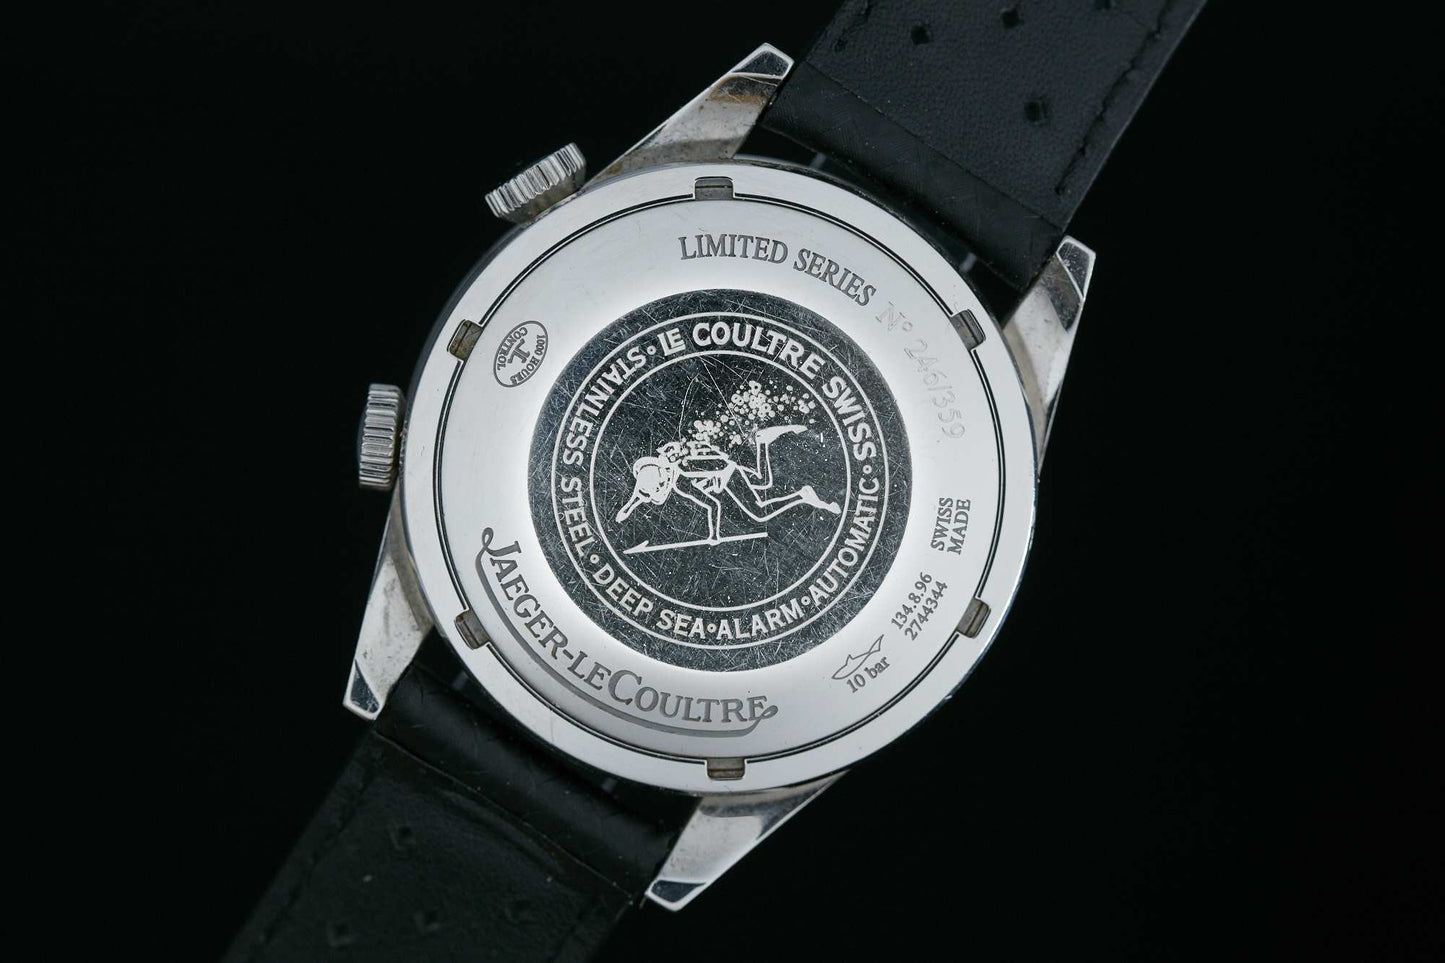 Jaeger LeCoultre Tribute to Deep Sea Alarm